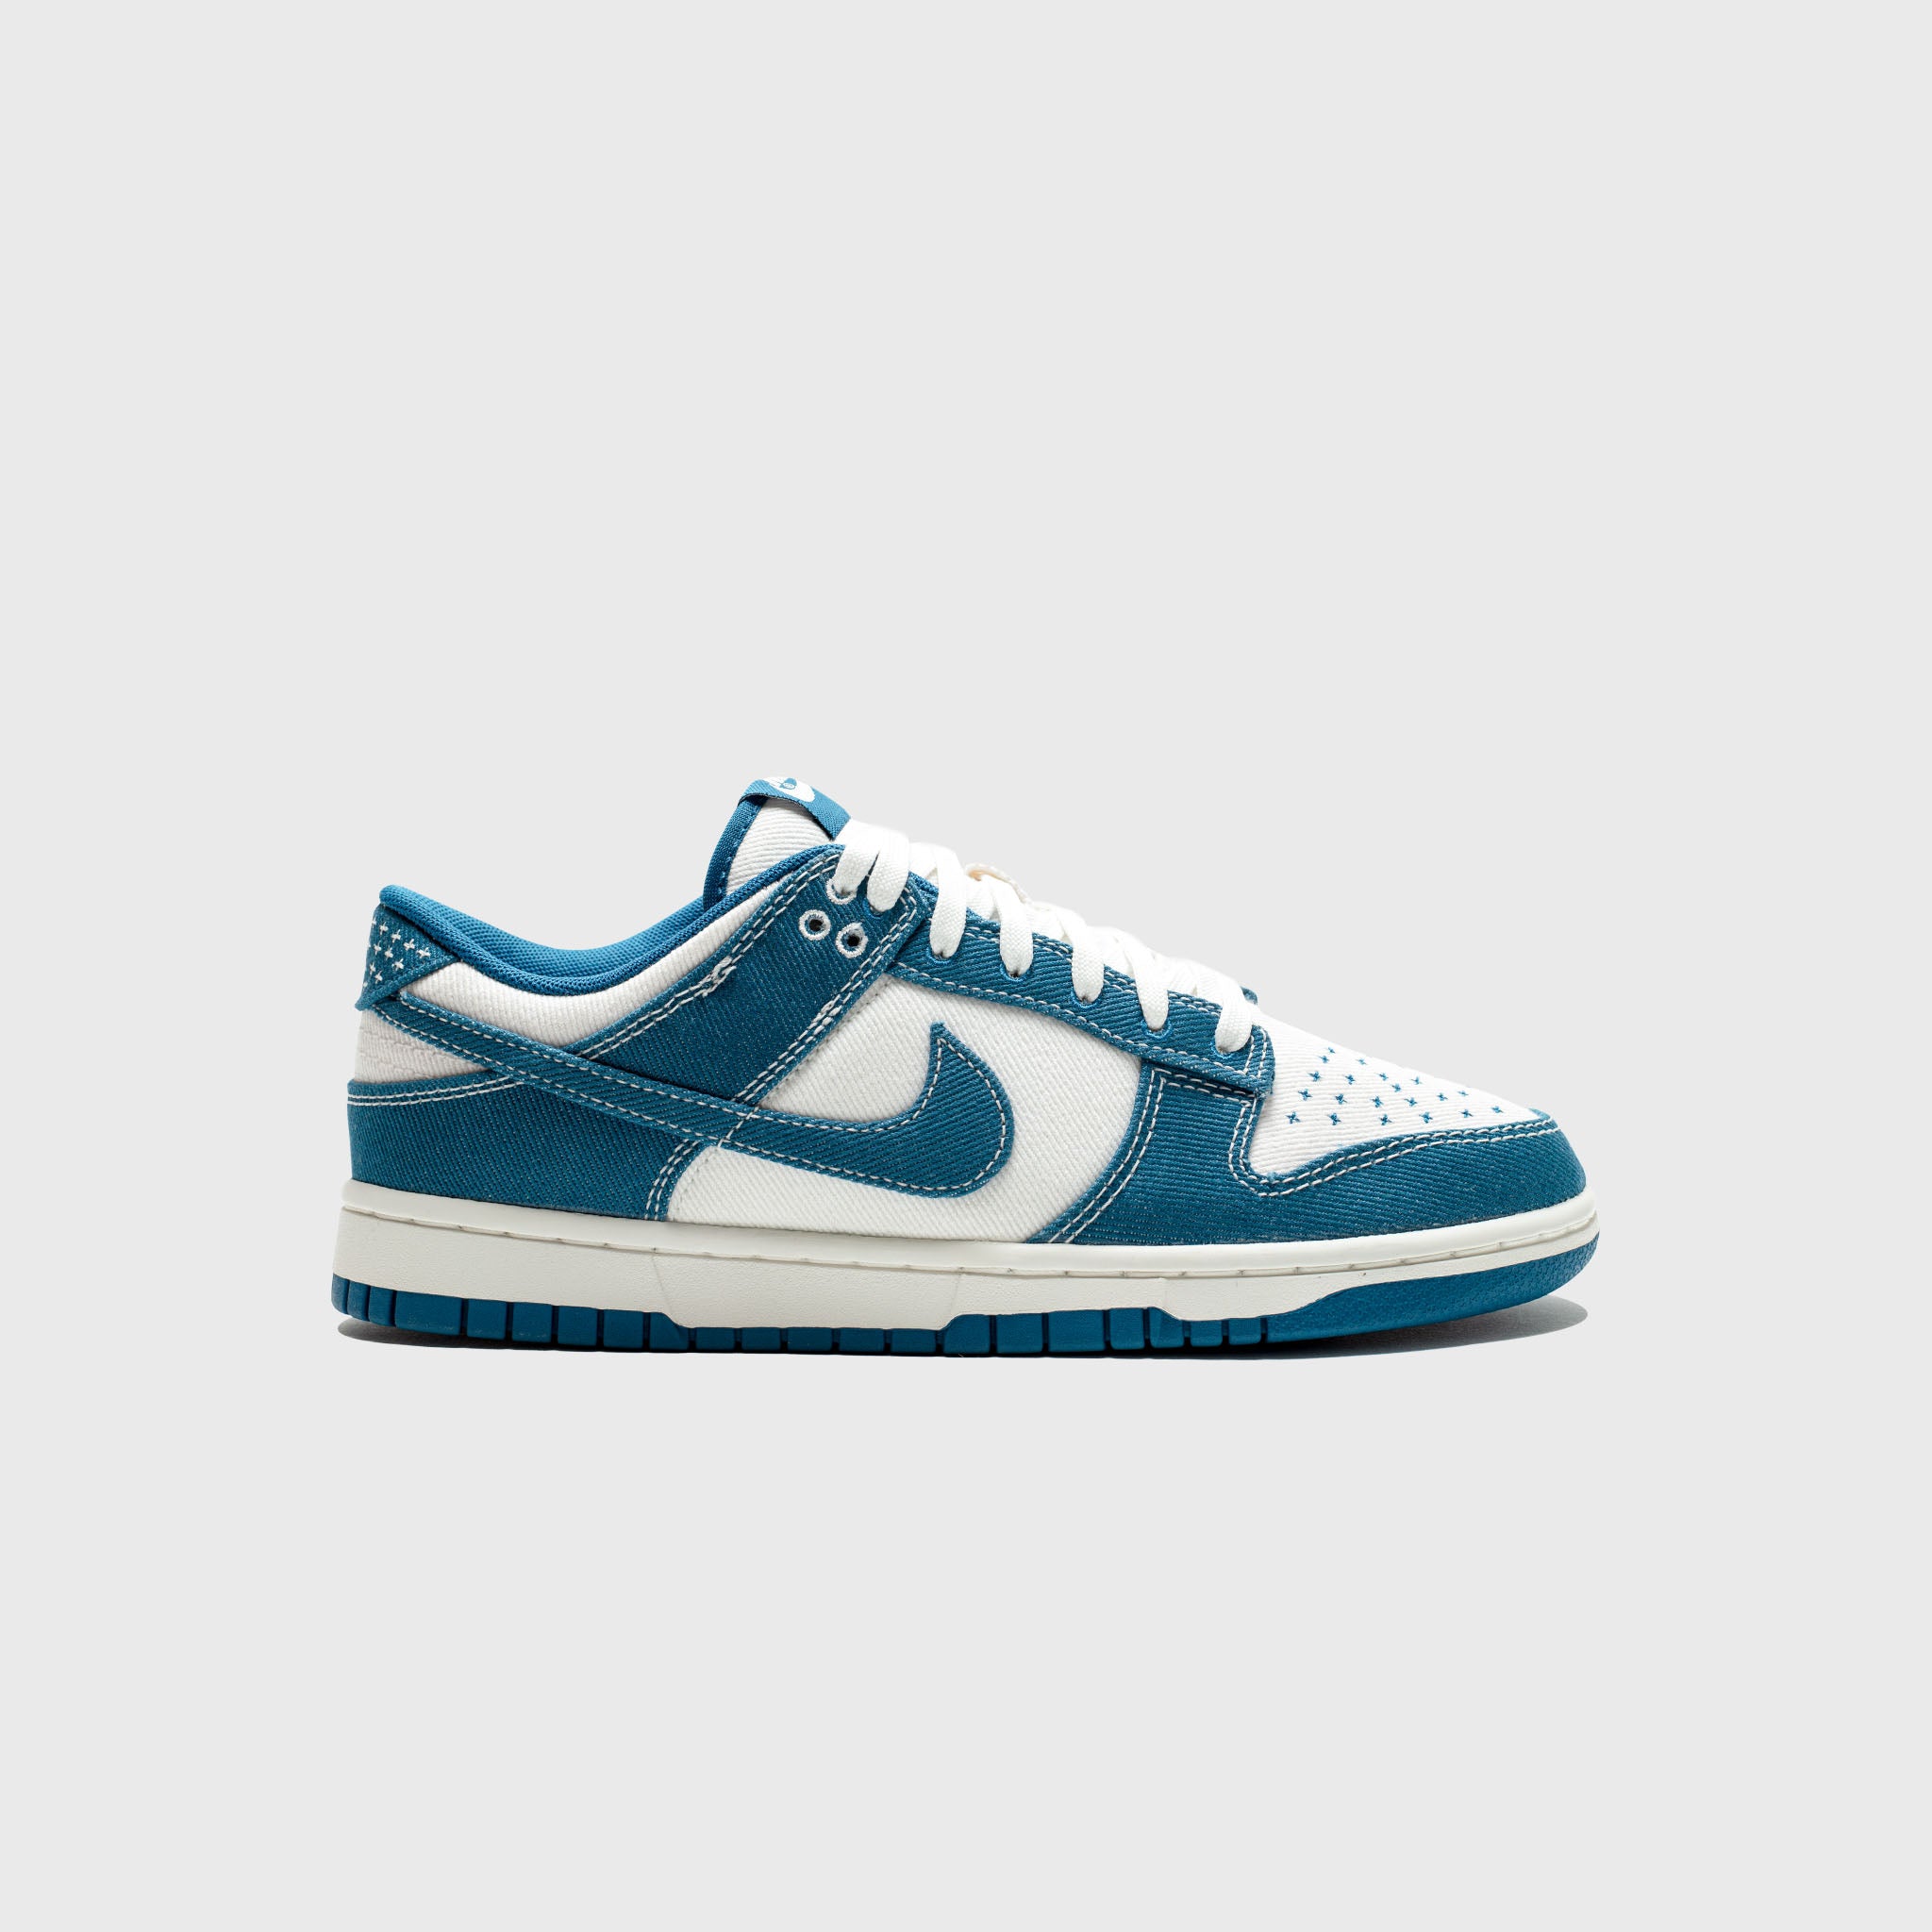 DUNK lateral LOW PRM "INDUSTRIAL BLUE"